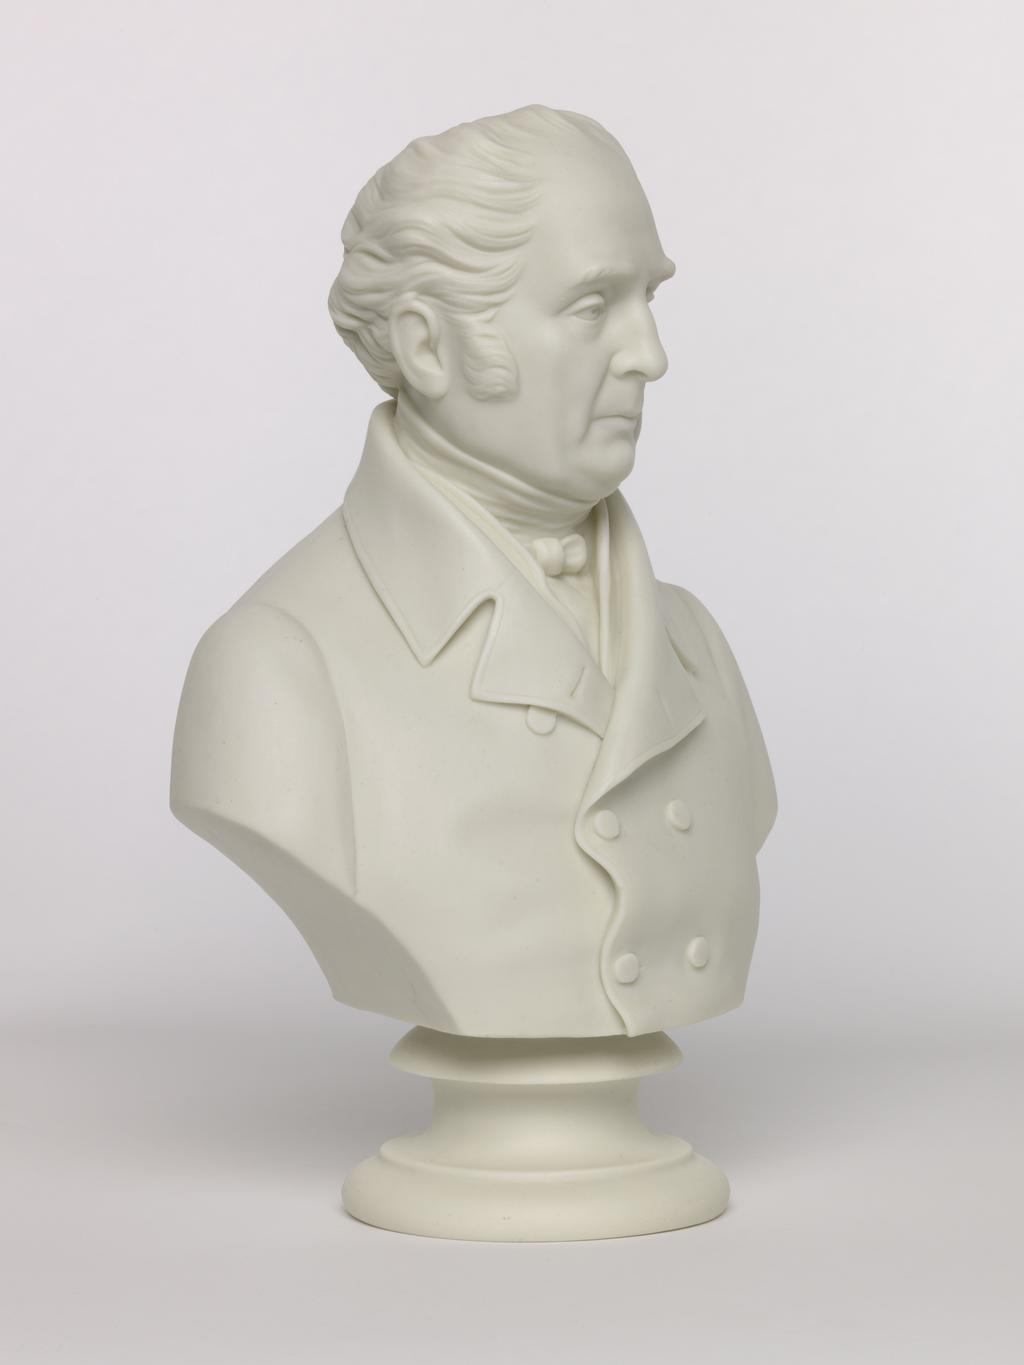 An image of Bust. Unknown man. Copeland, England, Staffordshire, Stoke-on-Trent. Westmacott, James Sherwood, sculptor (British). Inscriptions: maker's name; reverse of bust; marked; J Sherwood Westmacott Sc 1852 COPELAND. Maker's name; underneath base; marked; COPELAND. Parian (porcelain), slip-cast, height, 26.7 cm, length, 18.3 cm, width, 10 cm, length, base, 9.2 cm, 1852 Acquisition Credit: Accepted by H. M. Government in lieu of Inheritance Tax from the estate of G. D. V. Glynn, and allocated to the Fitzwilliam Museum.